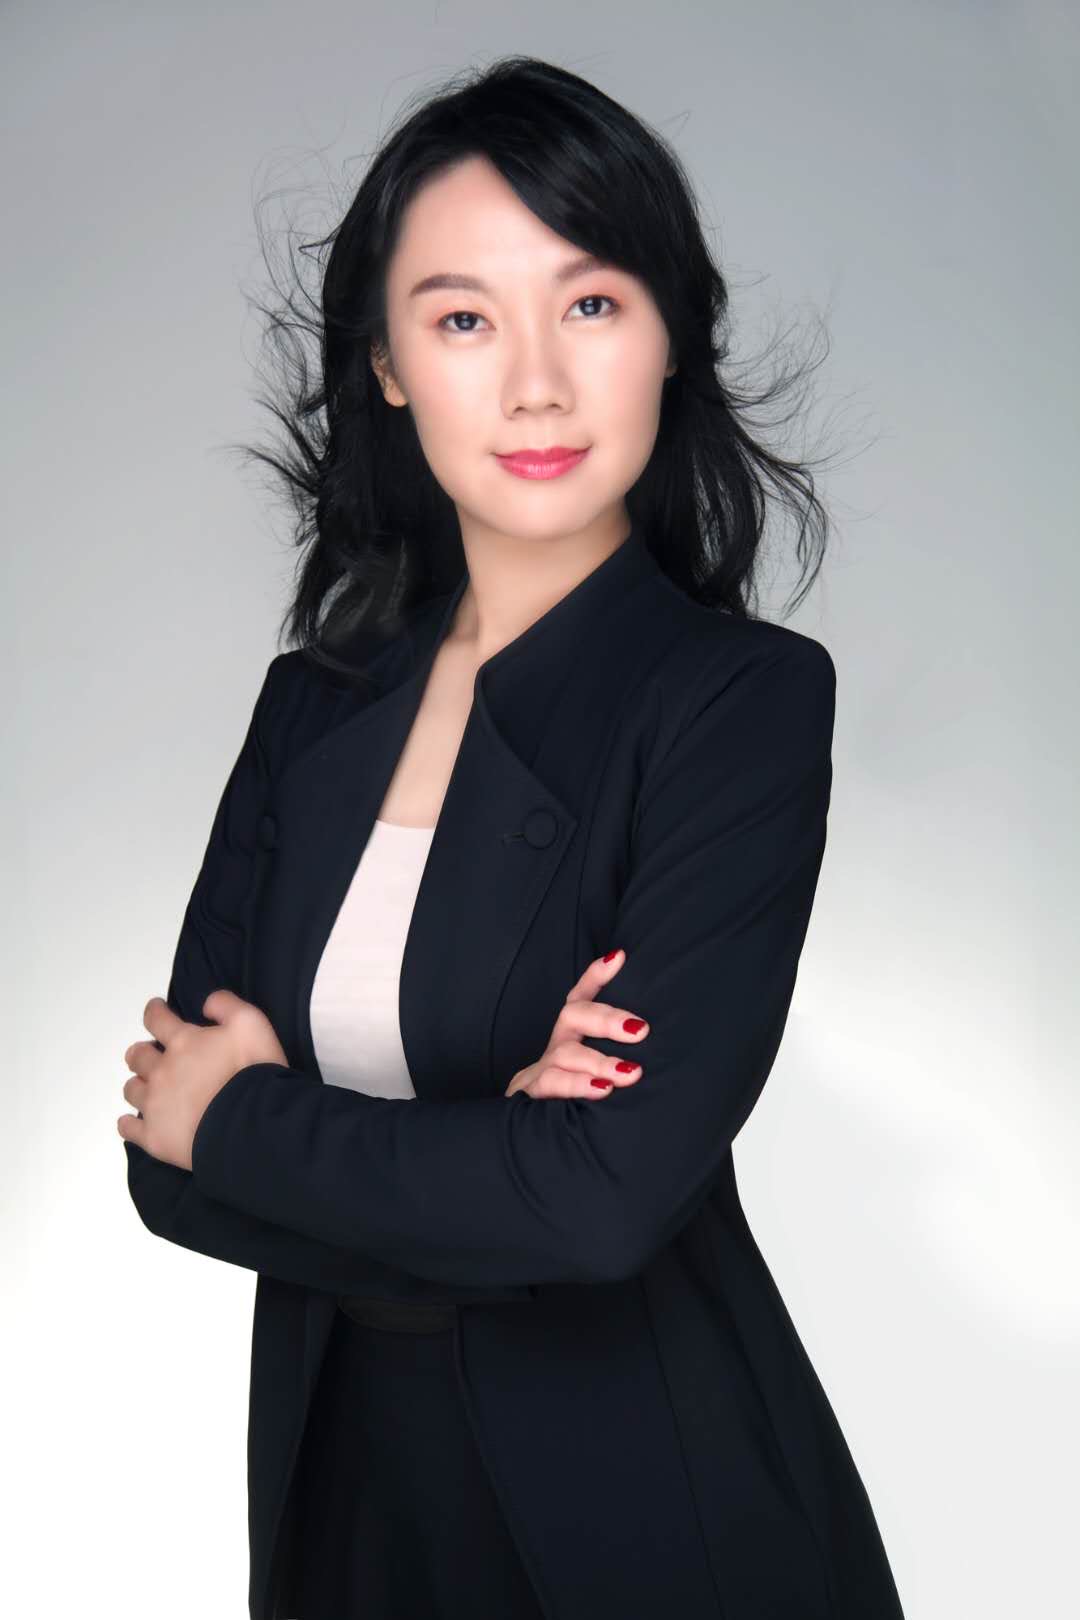 The Law Firm Of KALMAN SAMUELS, Attorneys Is Pleased To Welcome To Its Team Catherine Jing Ou.